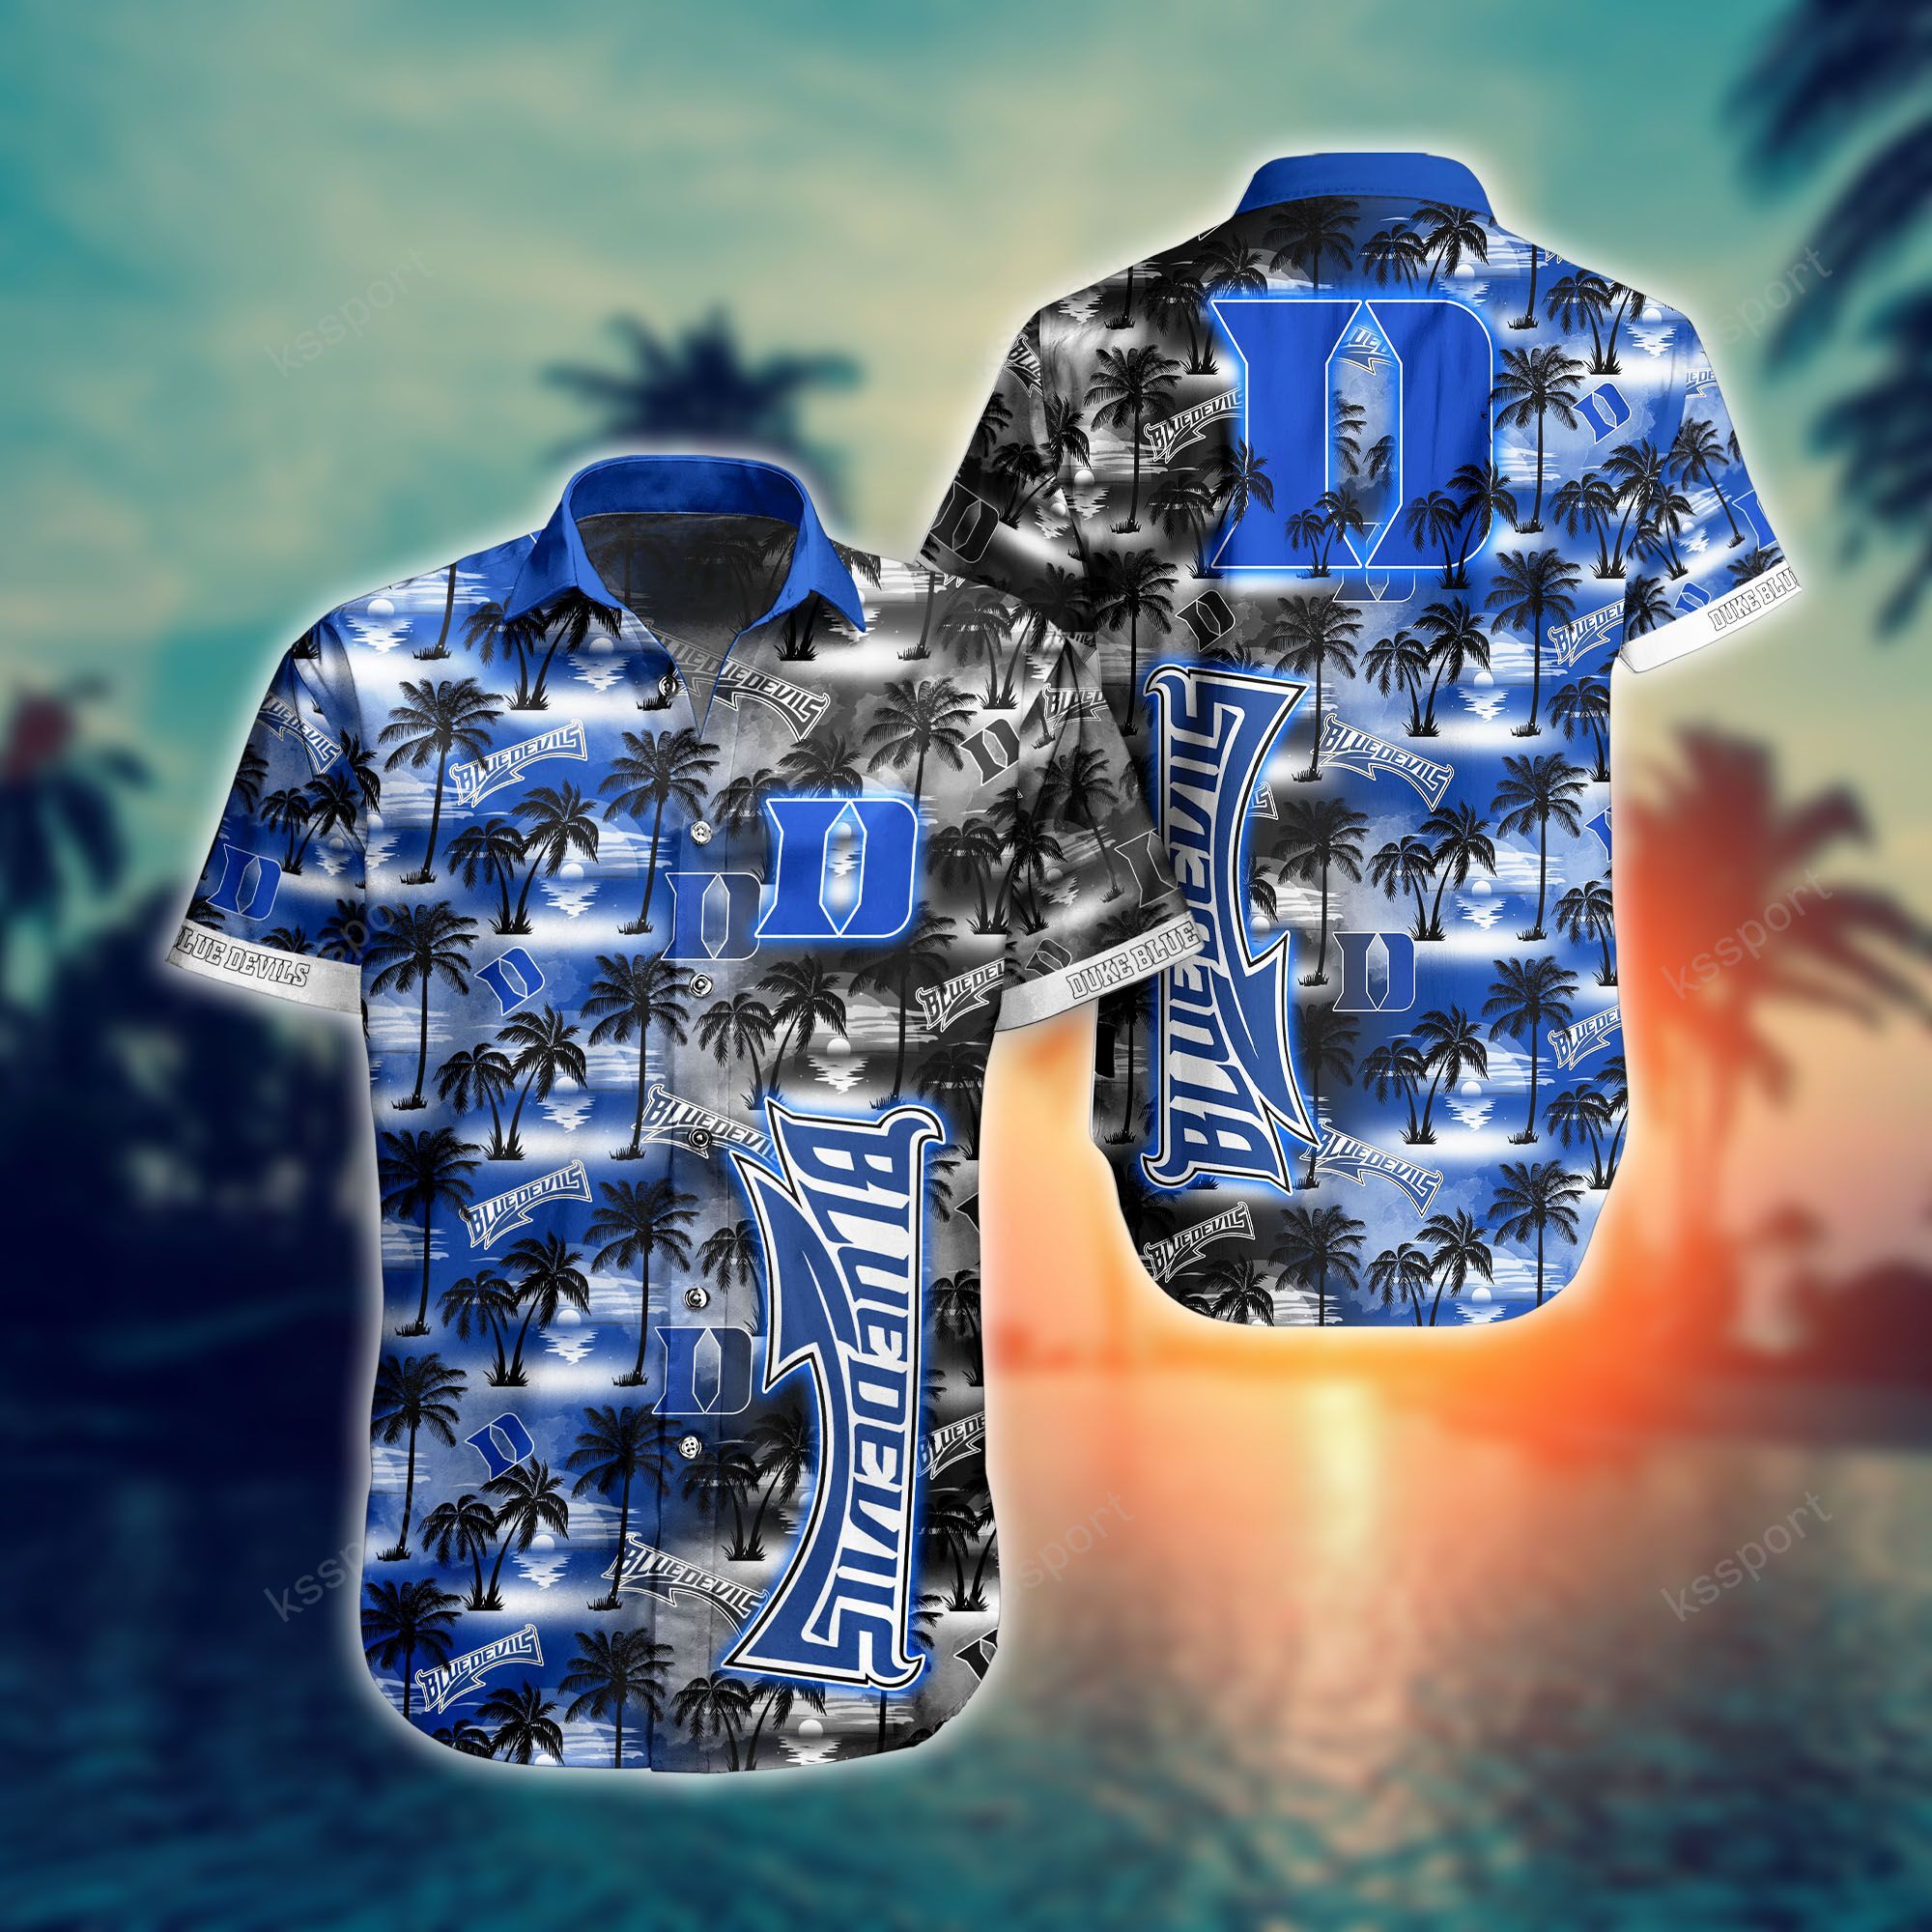 Treat yourself to a cool Hawaiian set today! 19